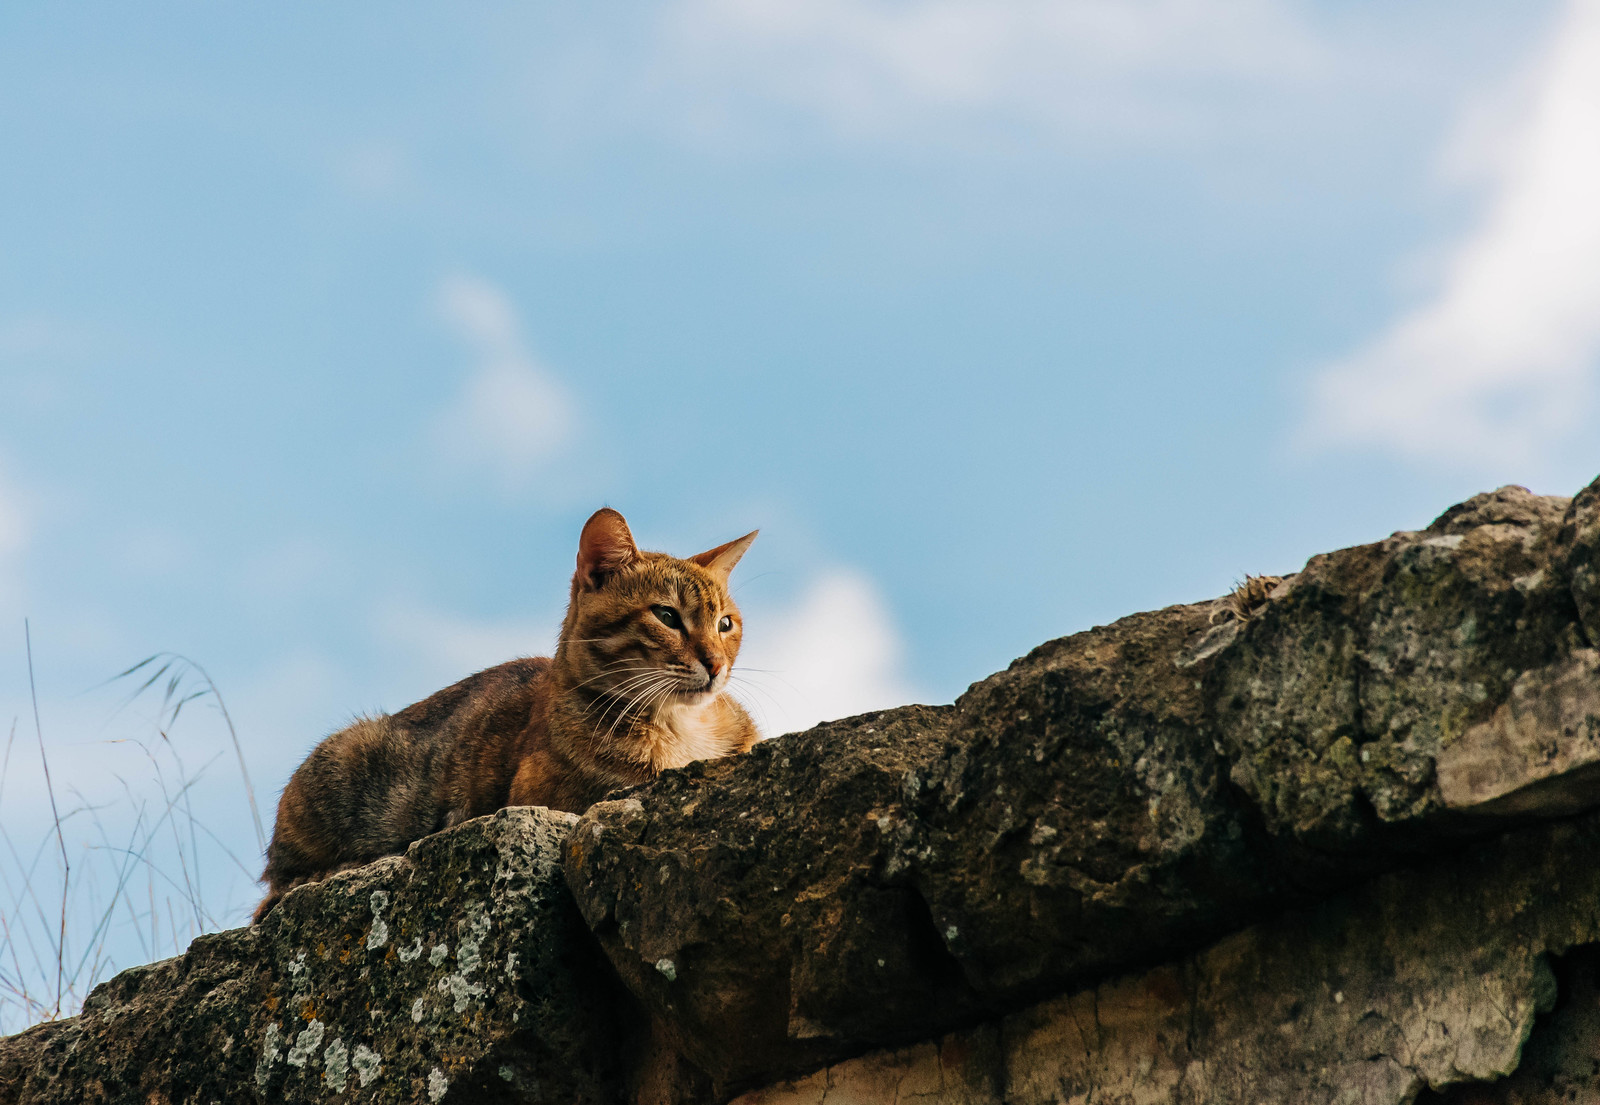 A local cat sunning on a stone wall in Sorano, one of the best places to visit in Tuscany